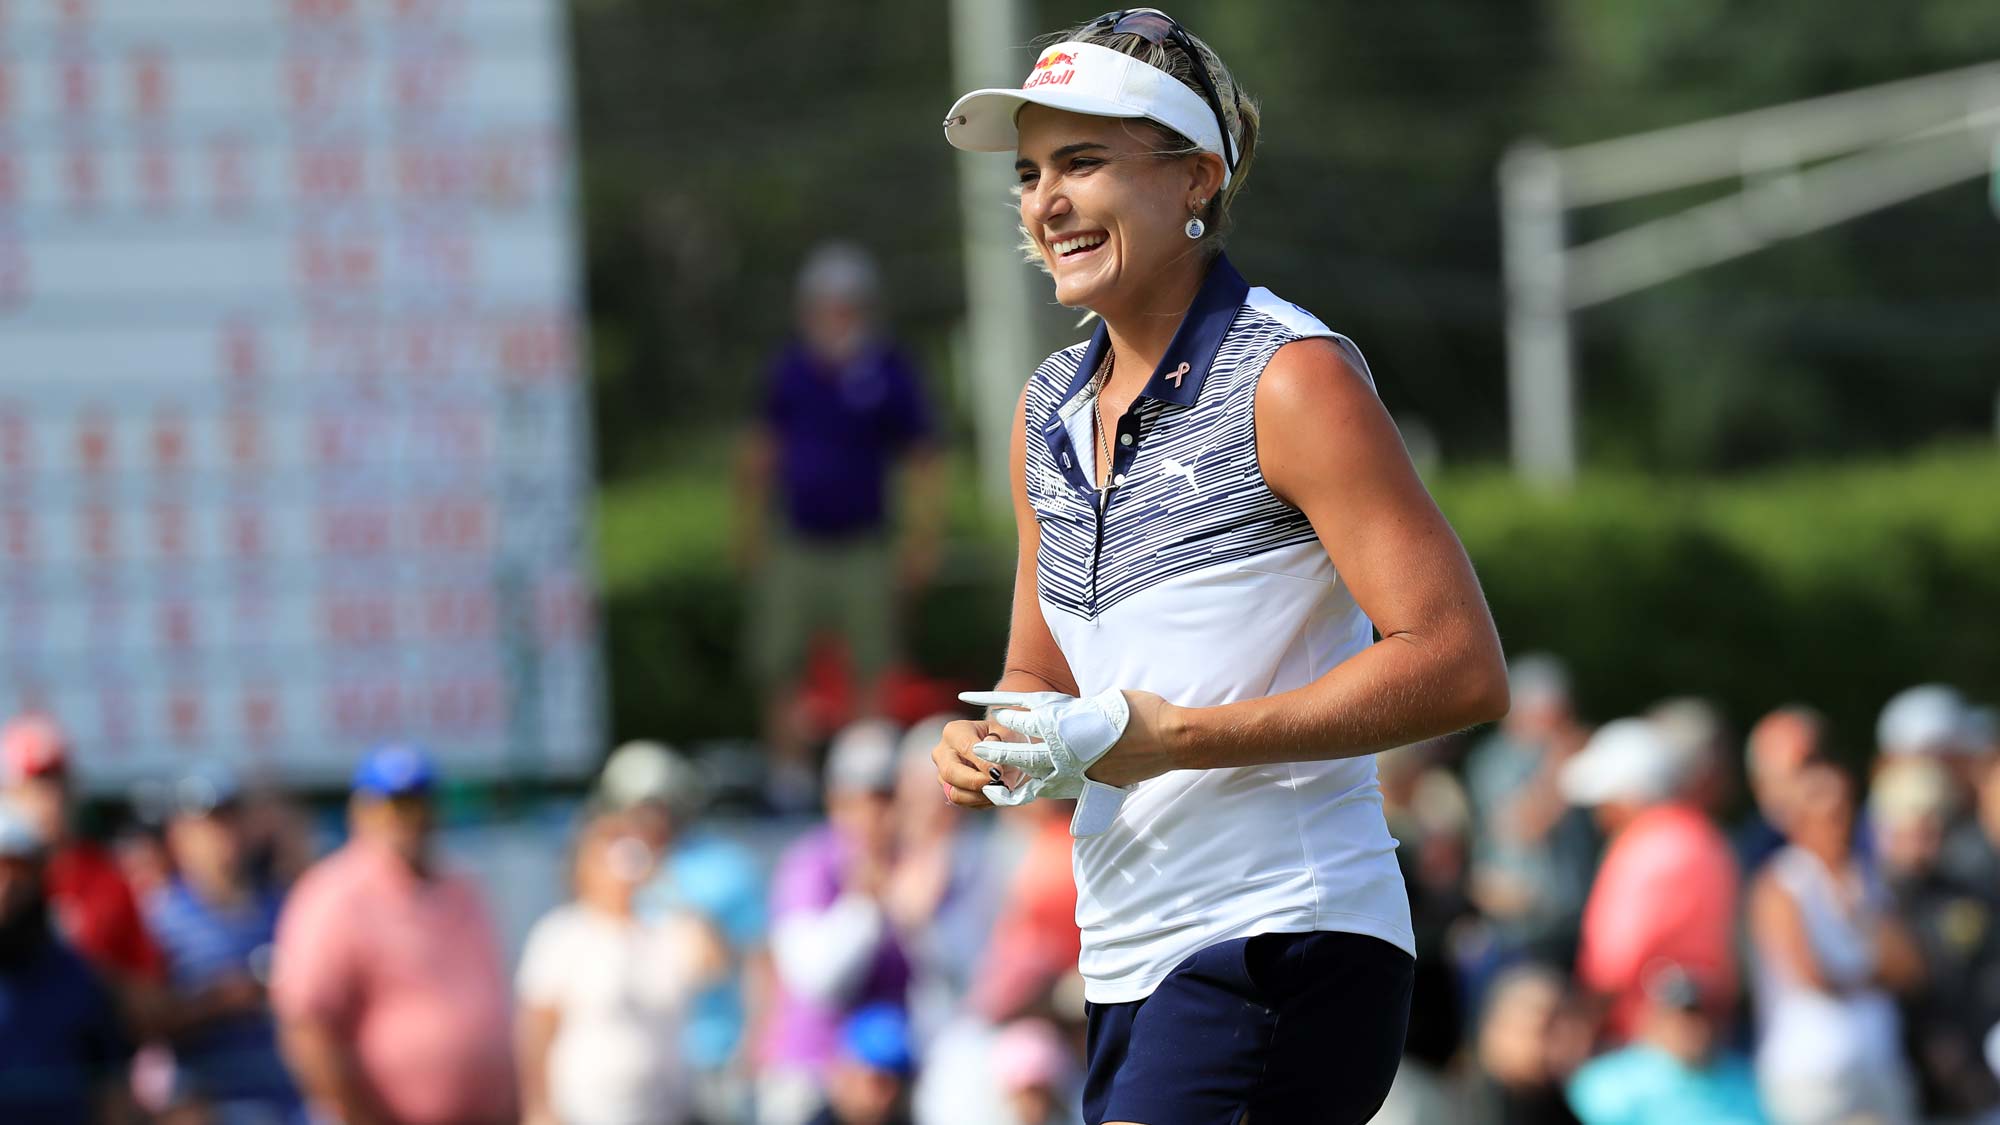 Lexi Thompson smiles as she walks off the green after making a putt for eagle on the 18th hole during the final round of the ShopRite LPGA Classic presented by Acer